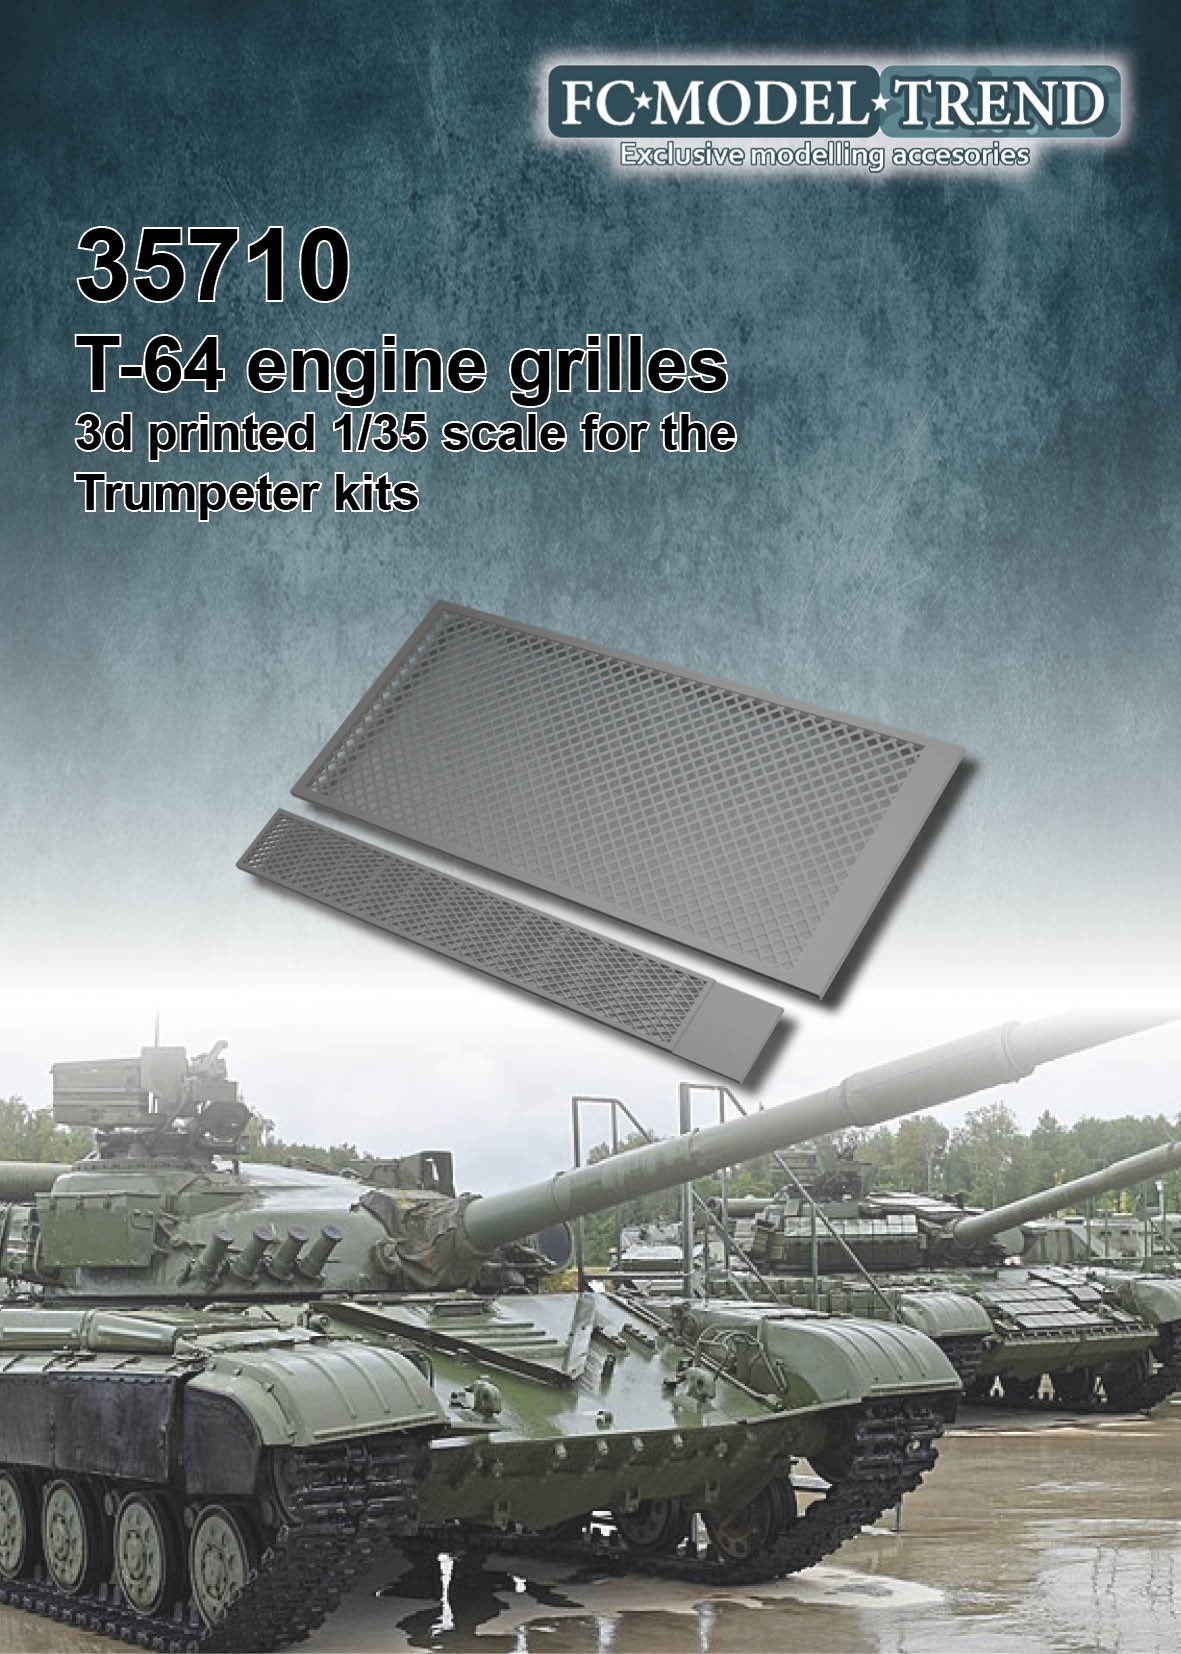 T-64 mesh grille, 3d printed 1/35 scale for the Trumpeter kit.